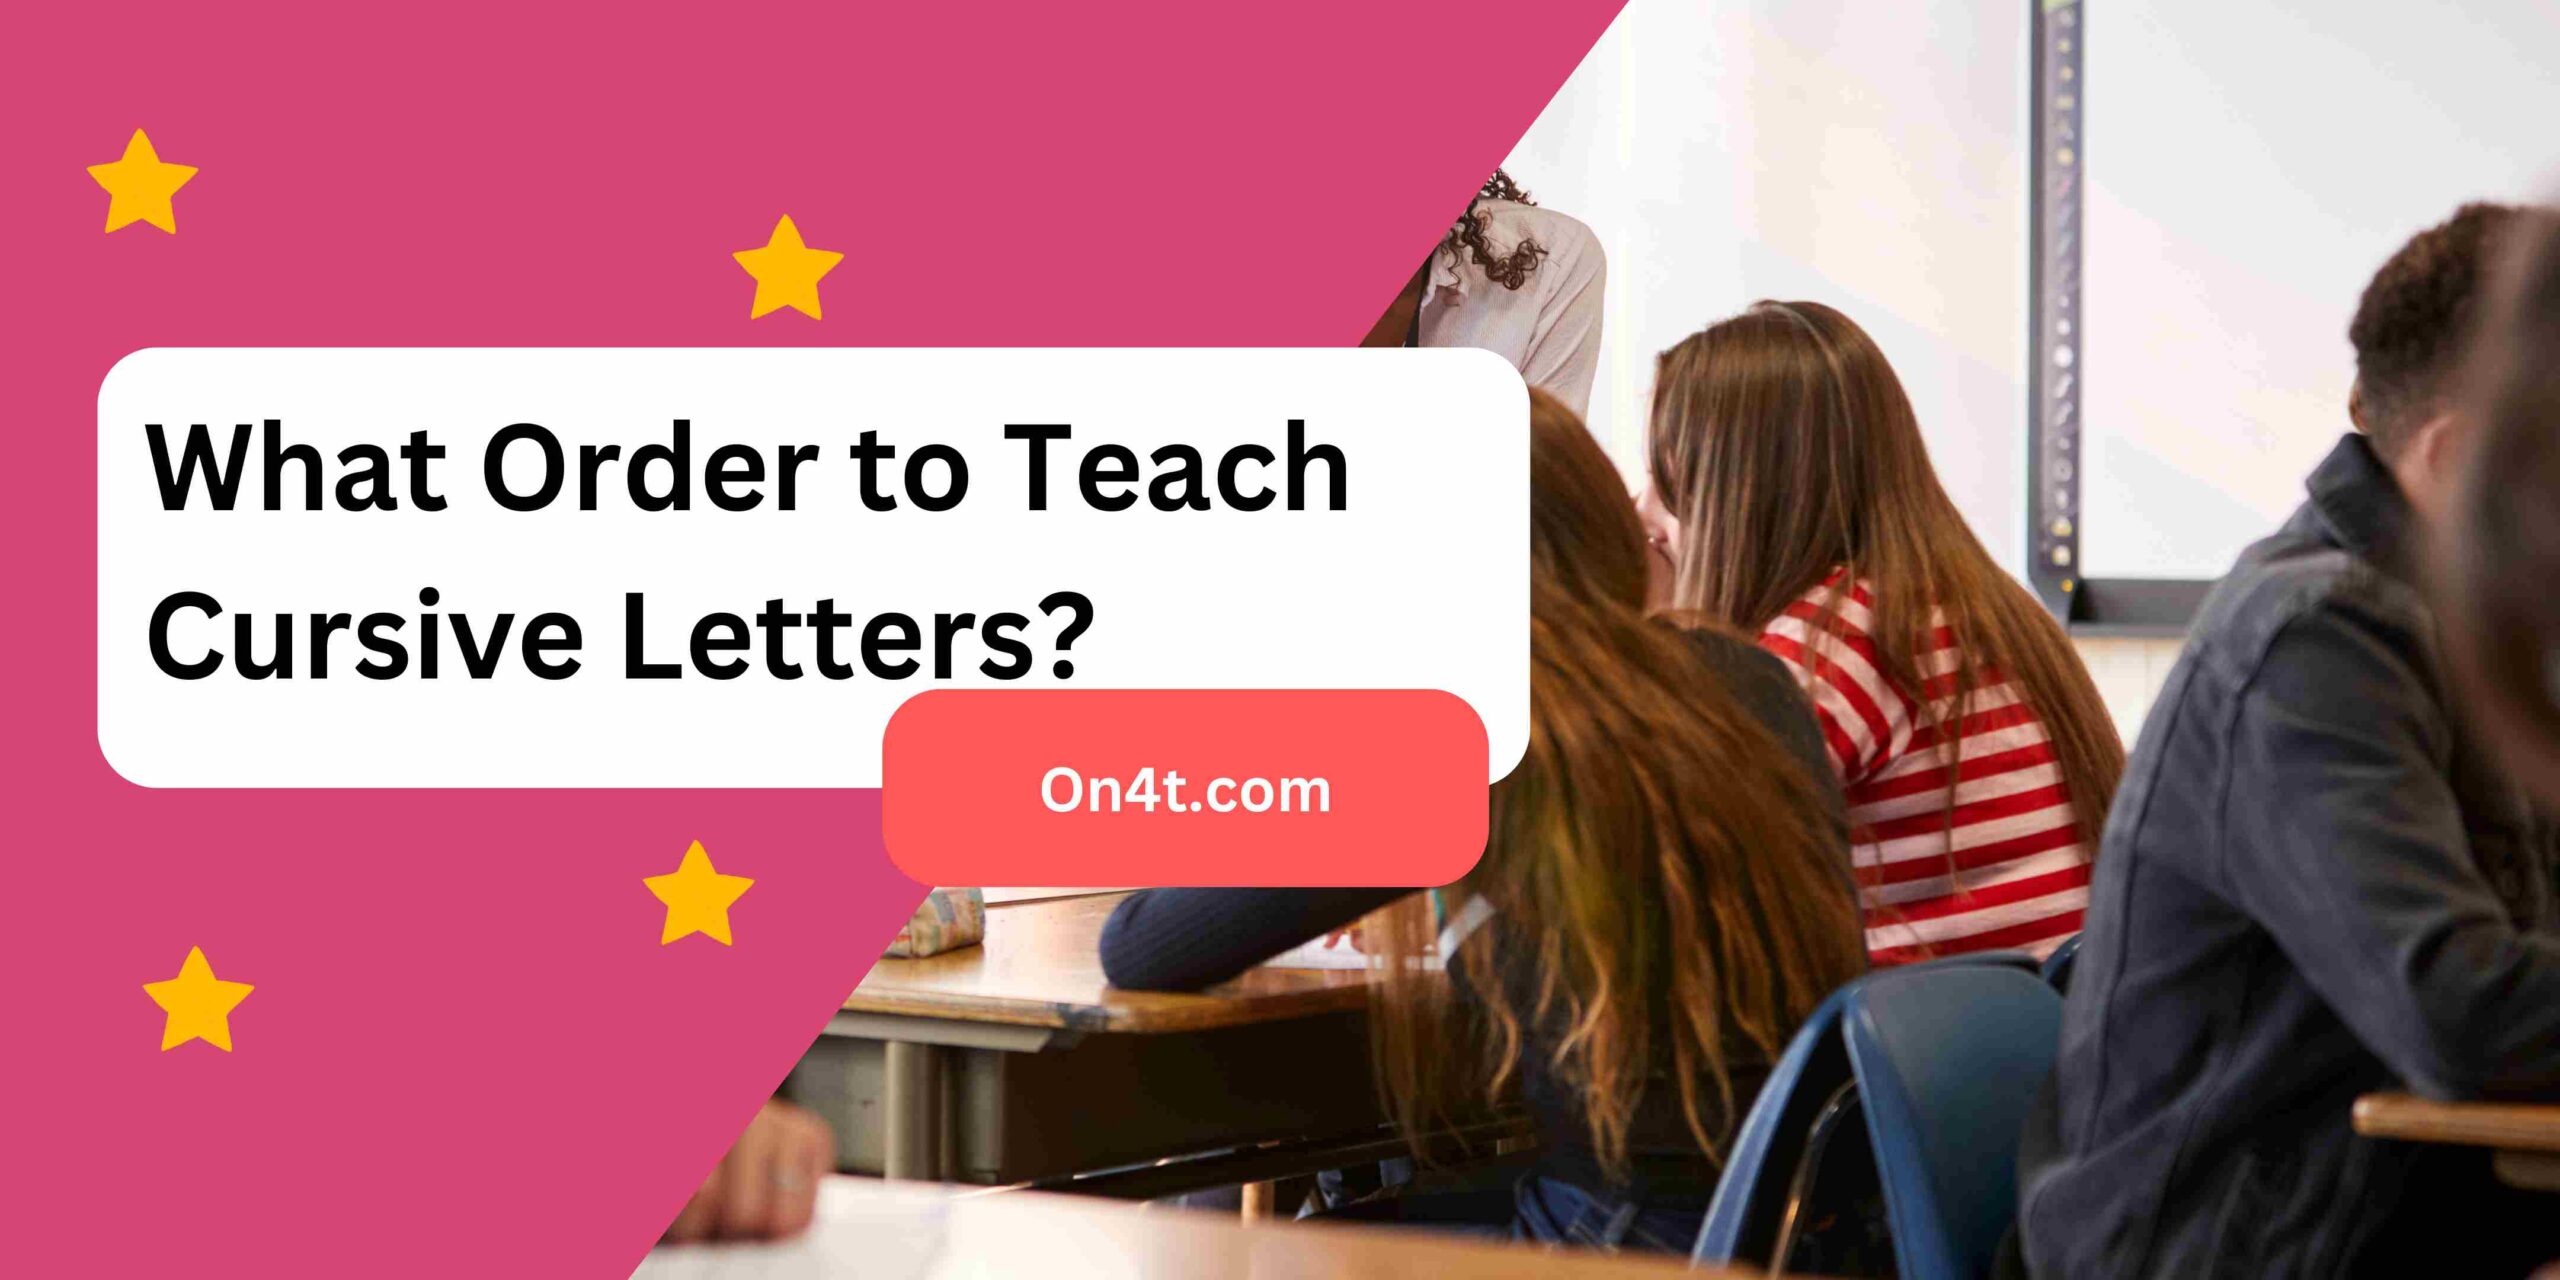 What Order to Teach Cursive Letters